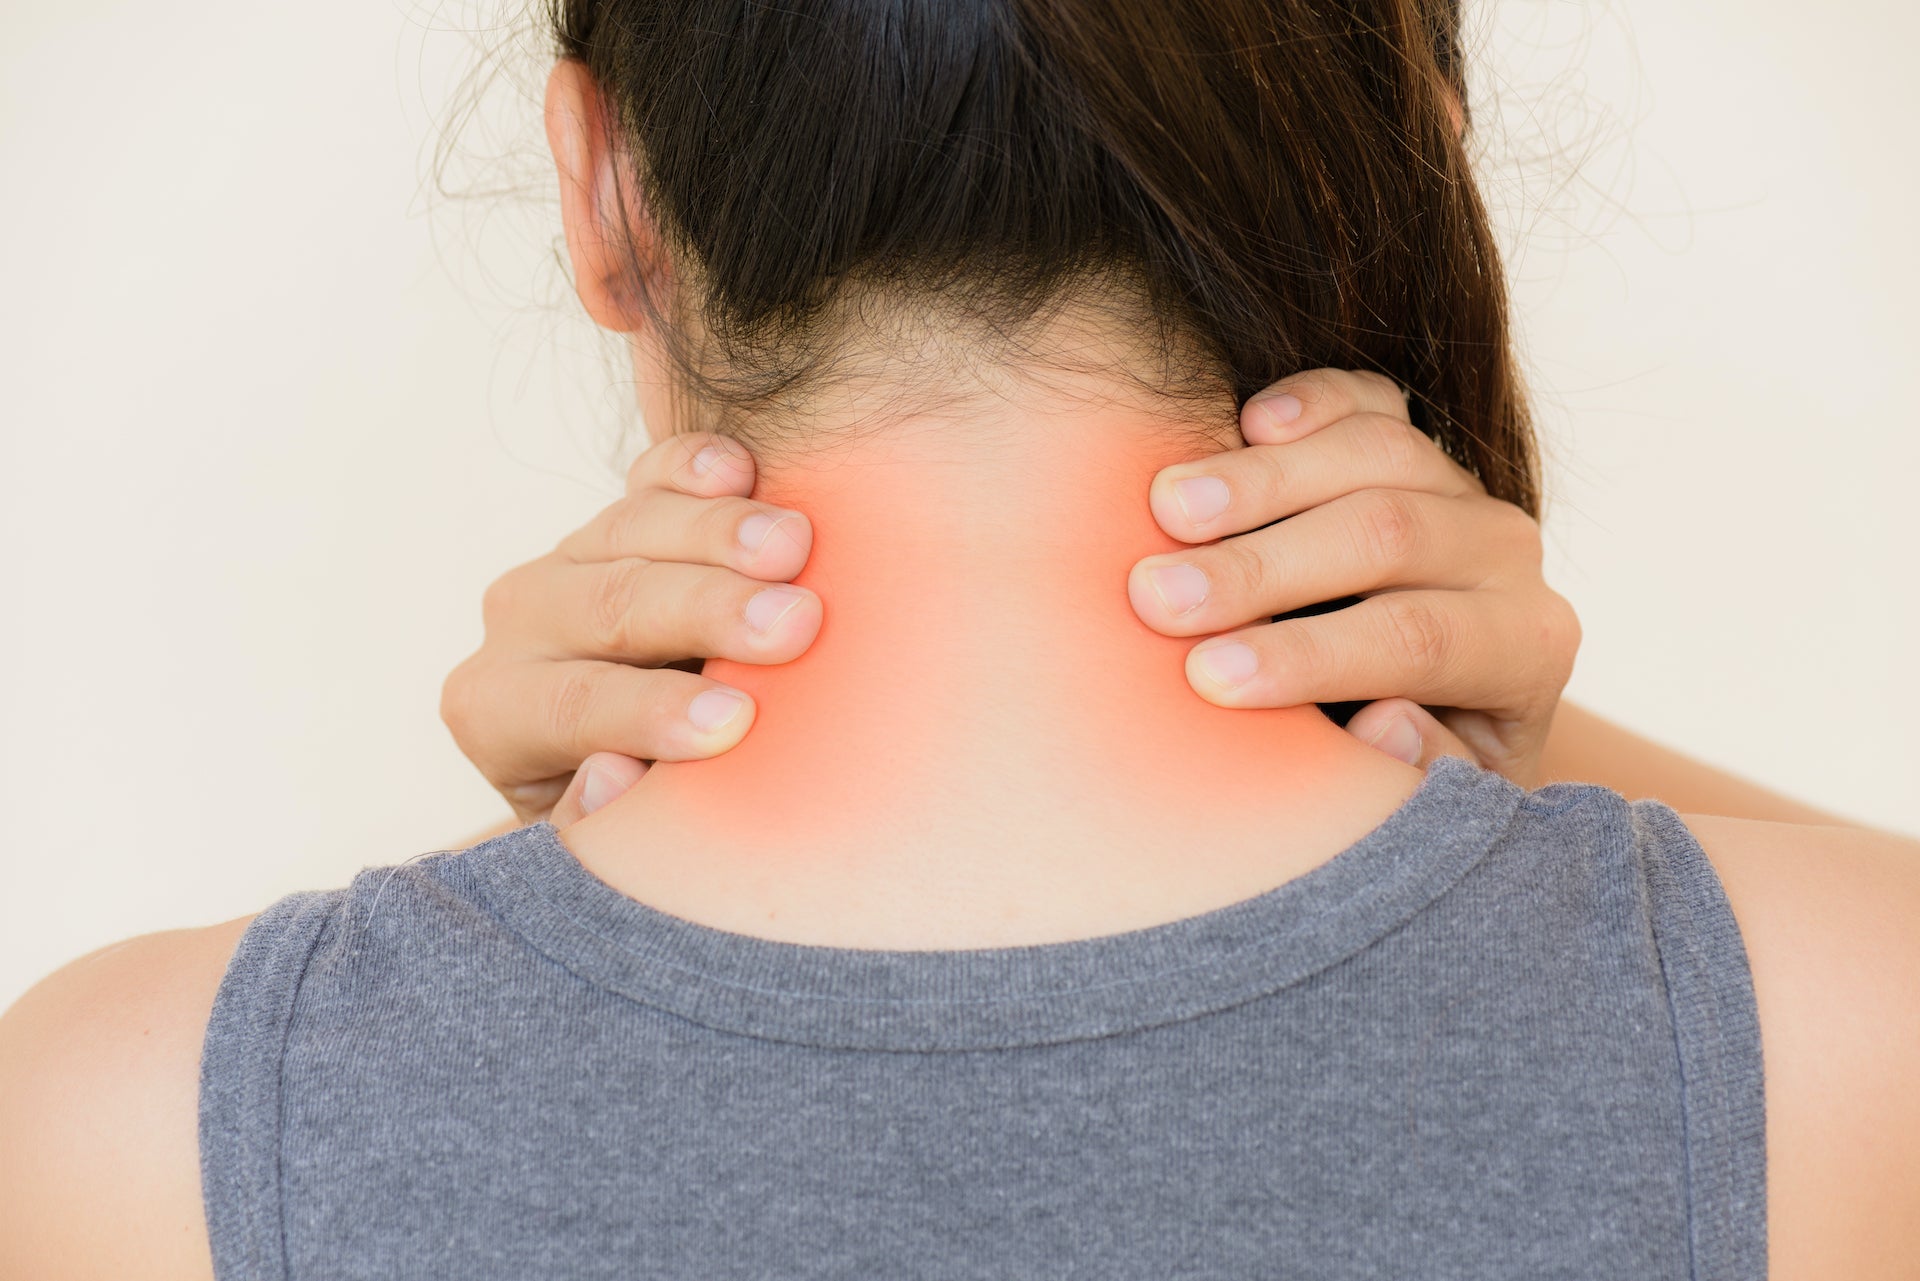 Which Essential Oil Can I Use For Neck Pain?